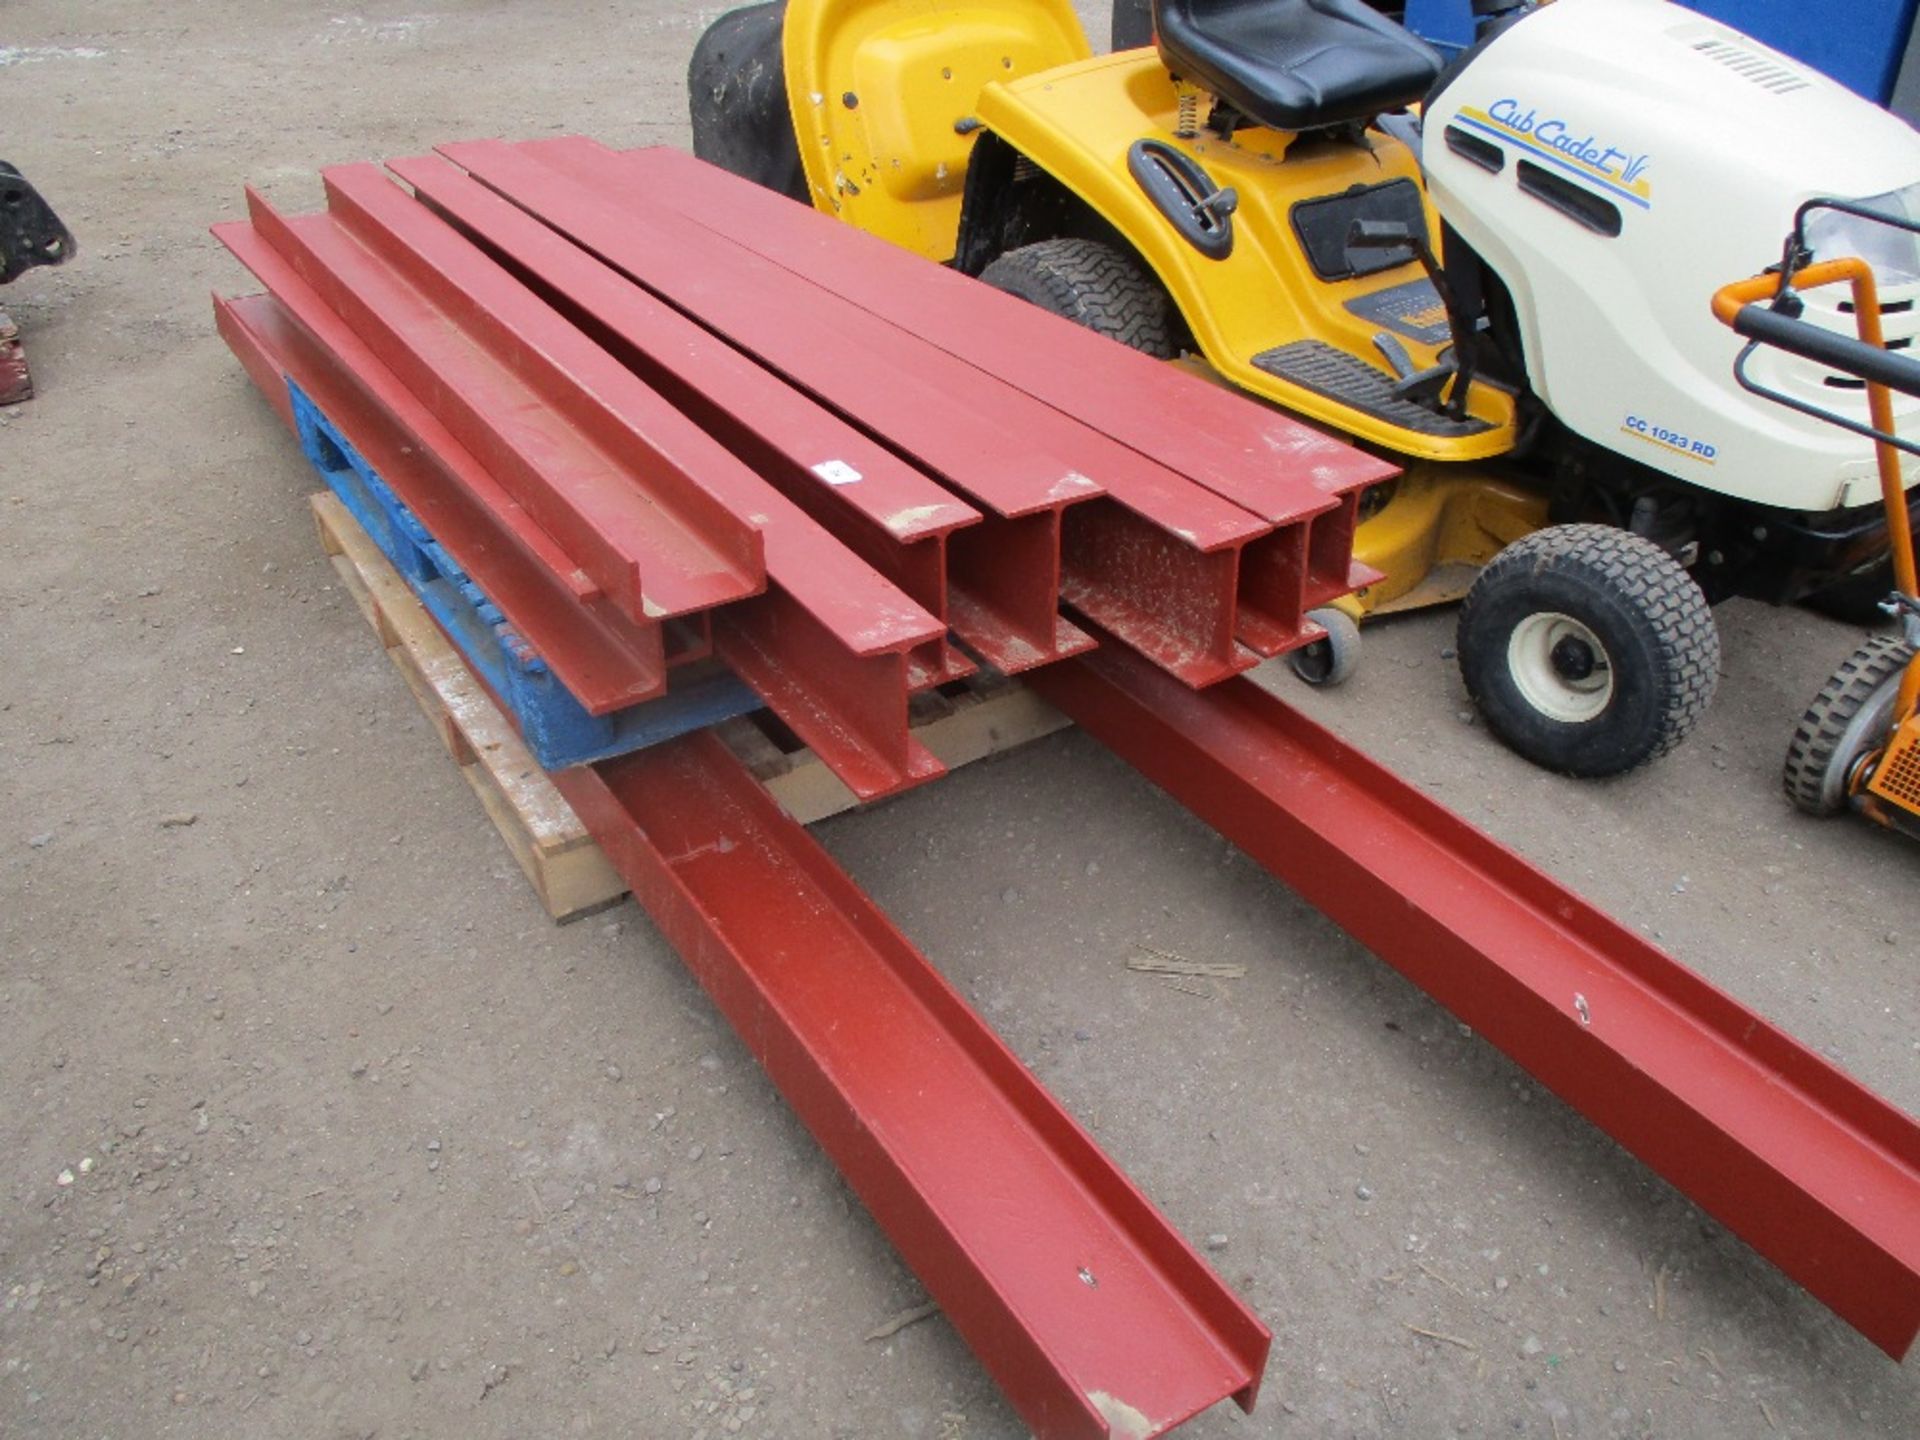 2 PALLETS CONTAINING RSJ AND CHANNEL STEELS RANGING FROM 6-12FT LENGTH APPROX NO VAT ON HAMMER PRI